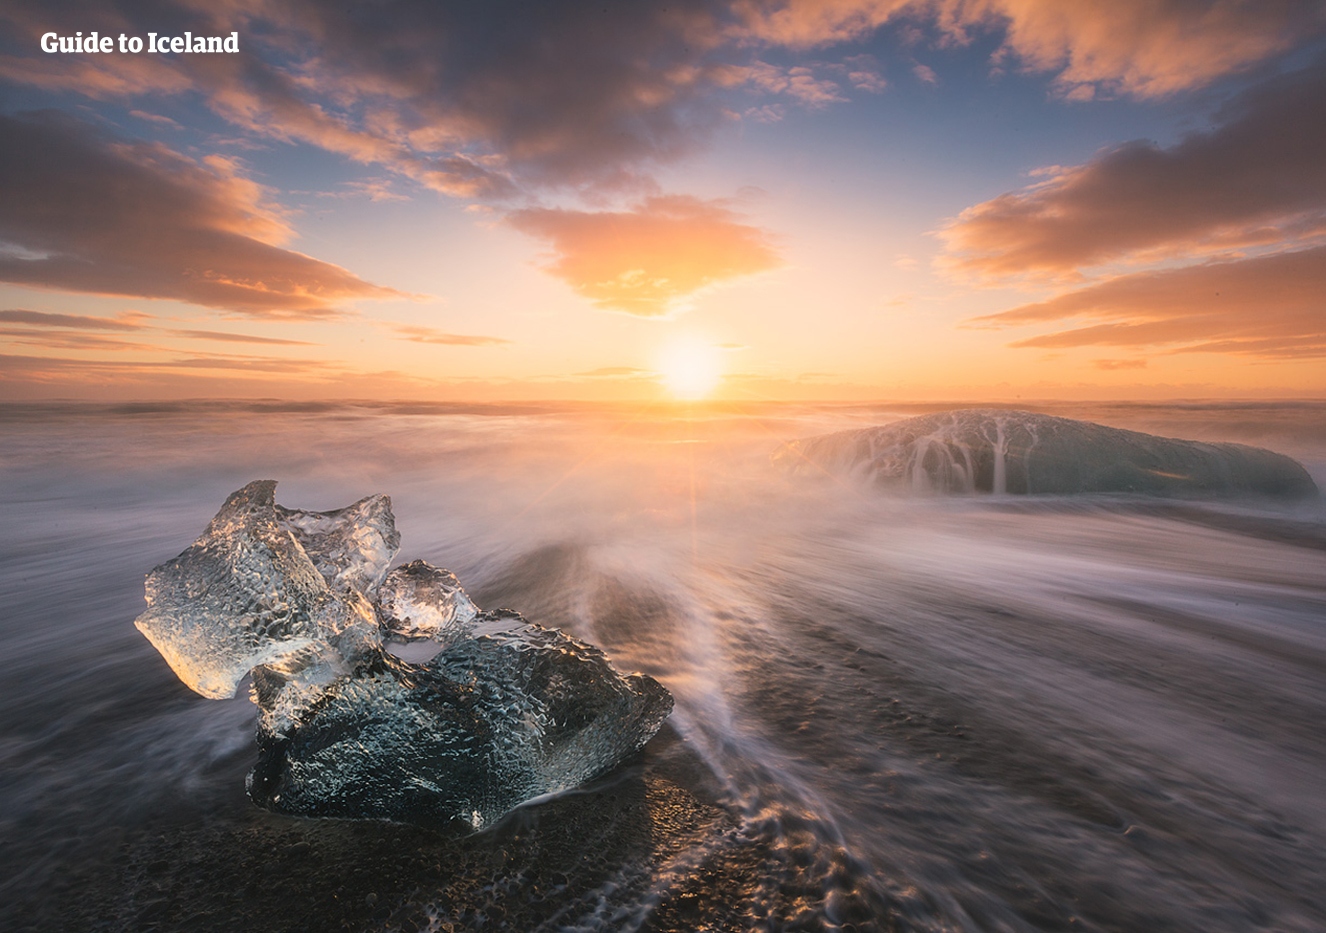 Diamond Beach is the stretch of coastline where ice bergs wash up on the shoreline, making for fantastic pictures.